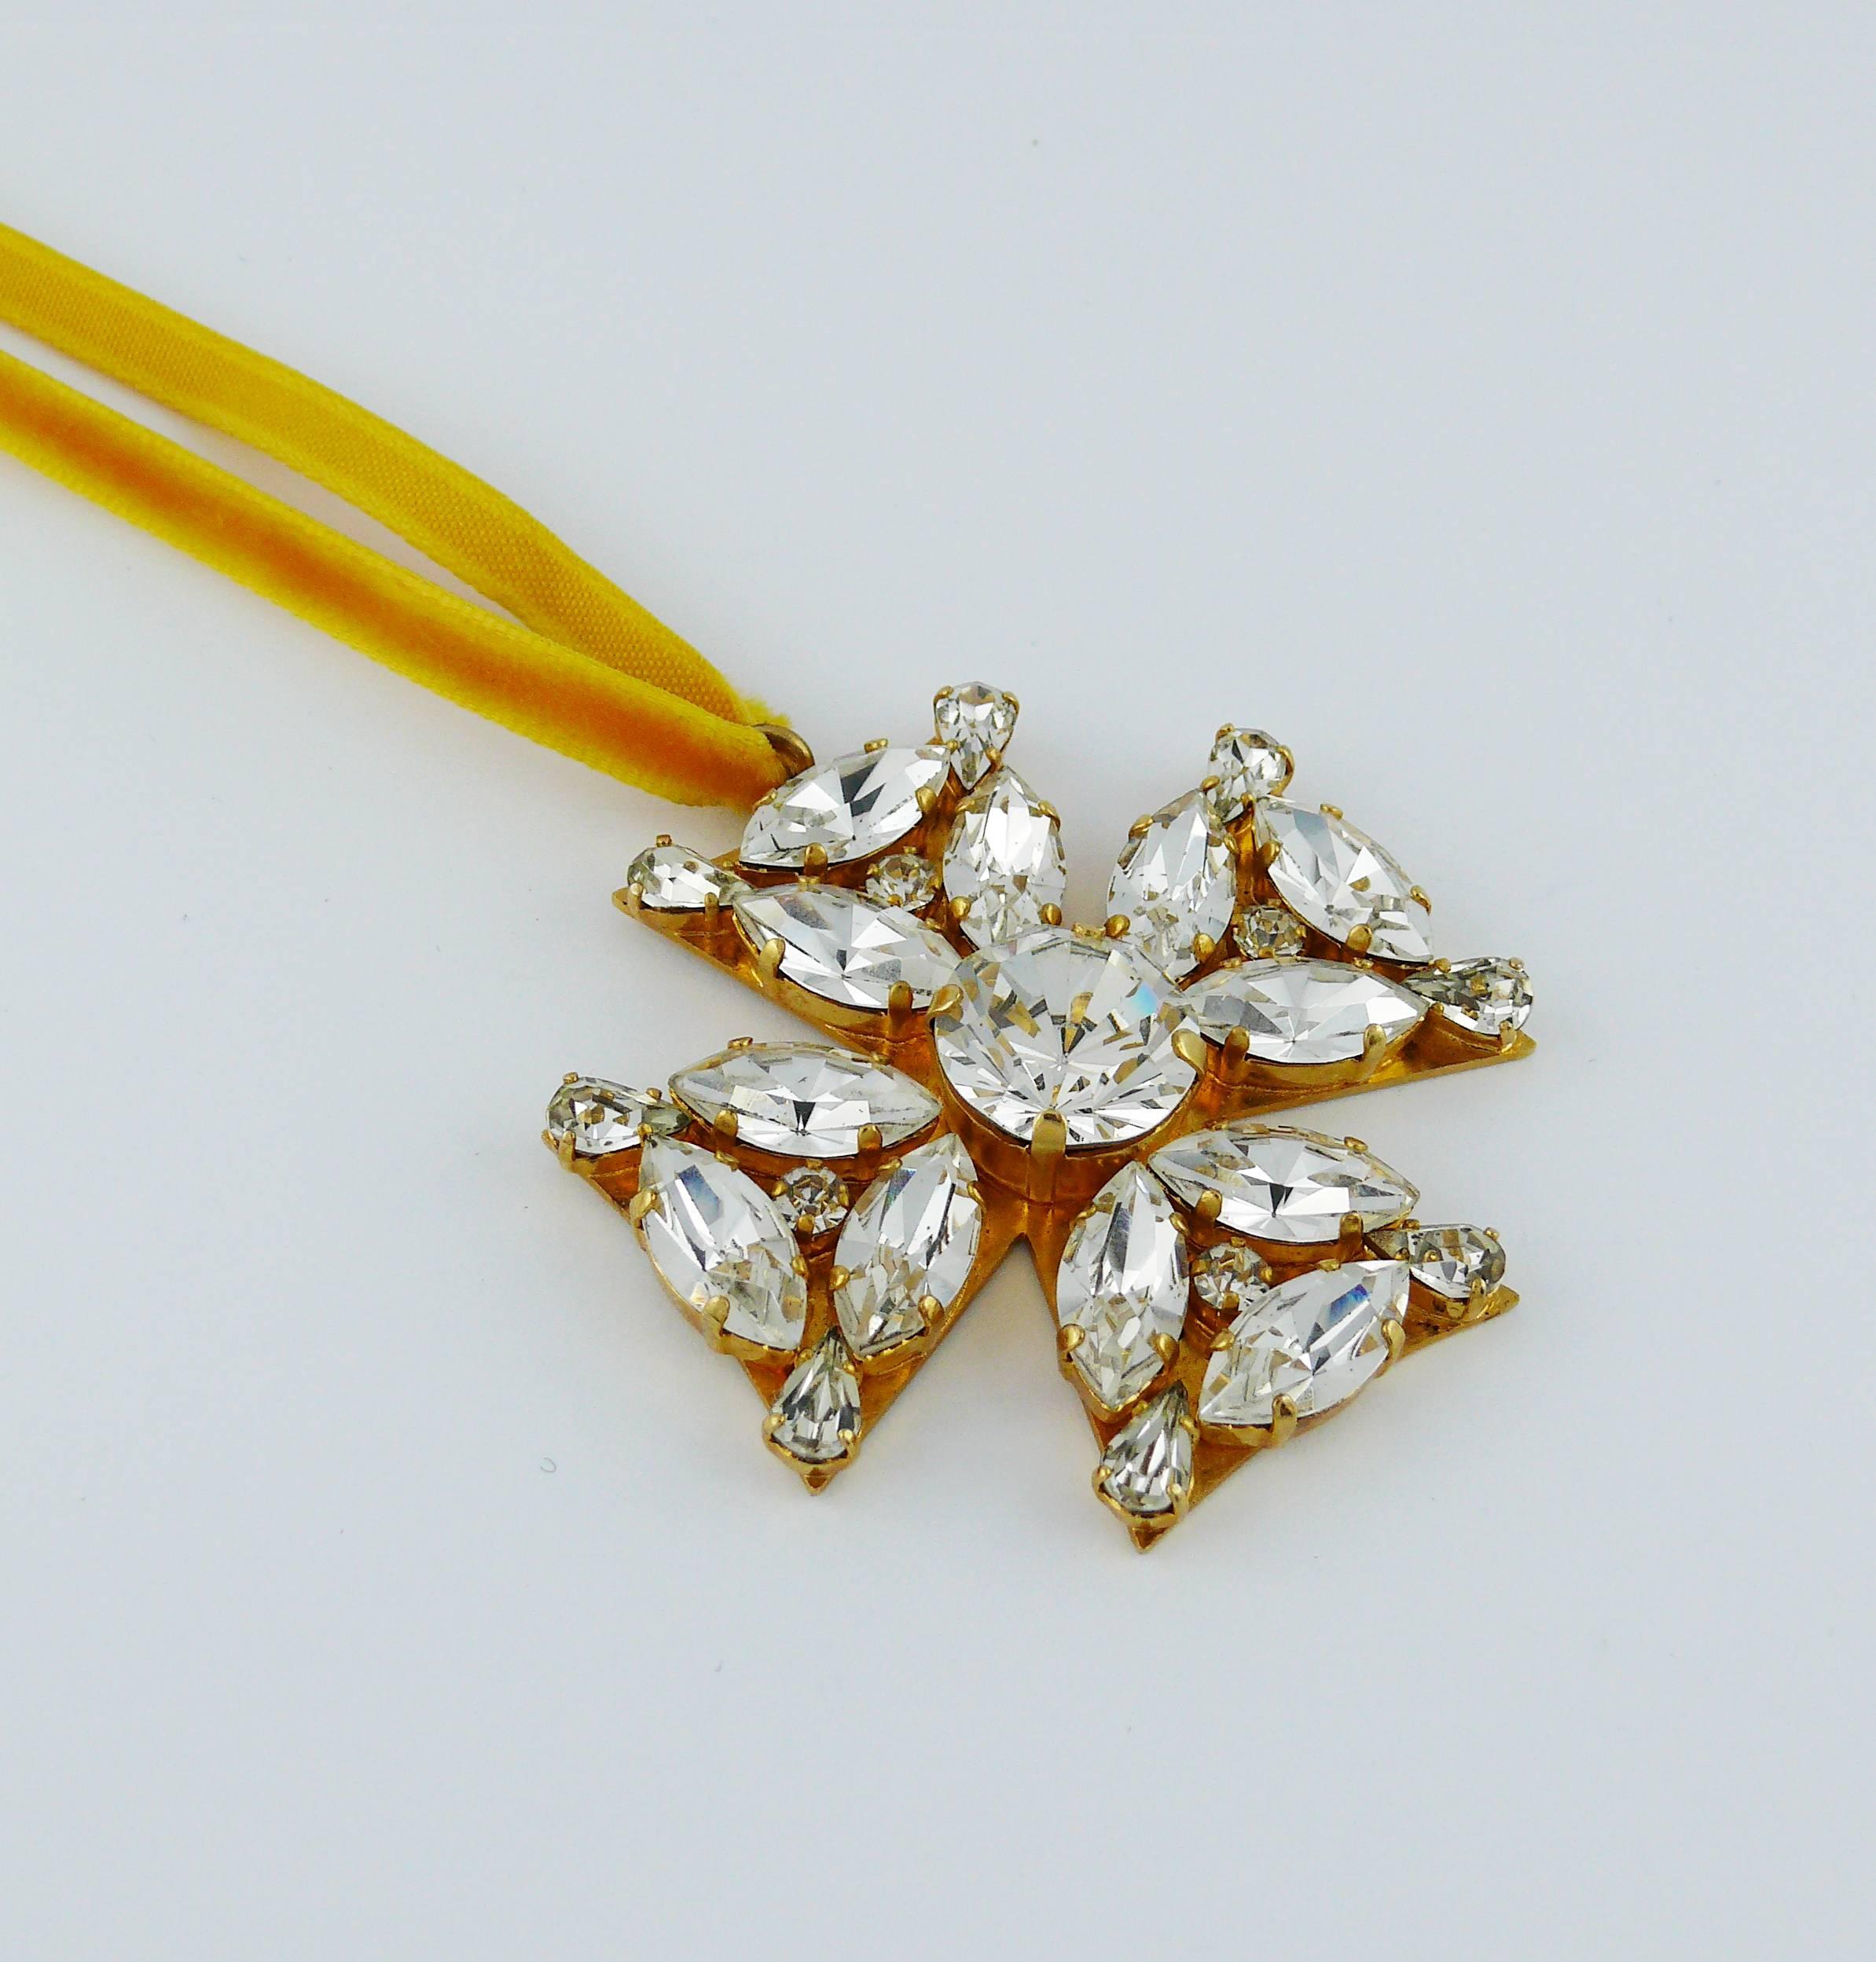 Gorgeous vintage unsigned gold toned Maltese cross pendant set with clear crystals.

Comes with a yellow velvet rope.

Indicative measurements : Maltese cross approx. 4.9 cm (1.93 inches) x 4.9 cm (1.93 inches) / velvet rope total length approx. 68